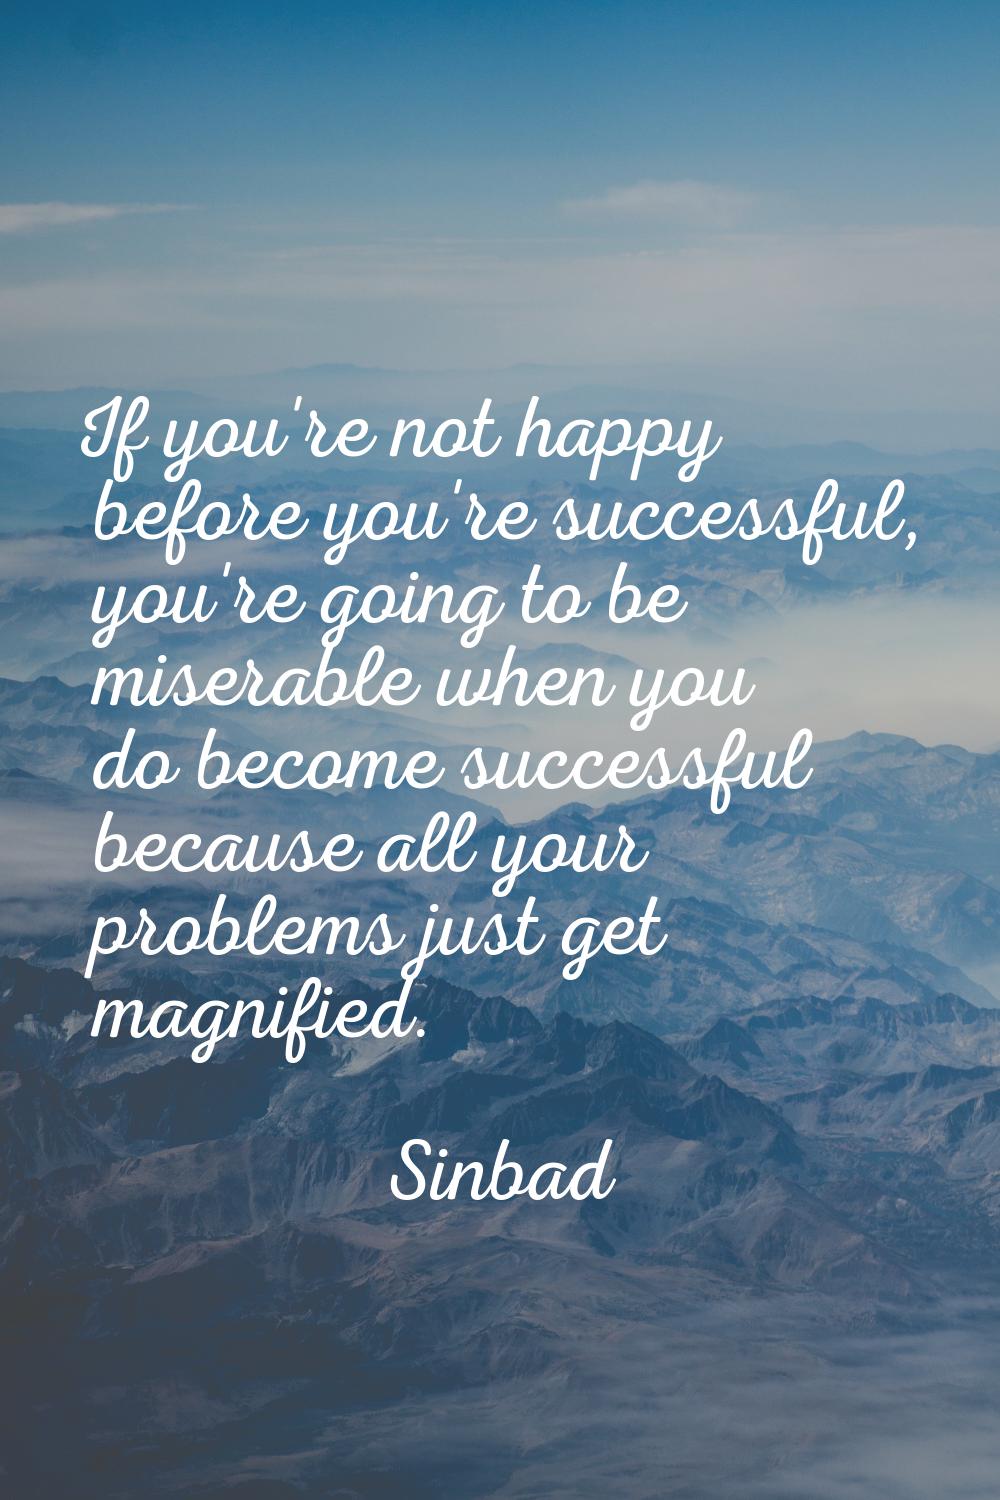 If you're not happy before you're successful, you're going to be miserable when you do become succe